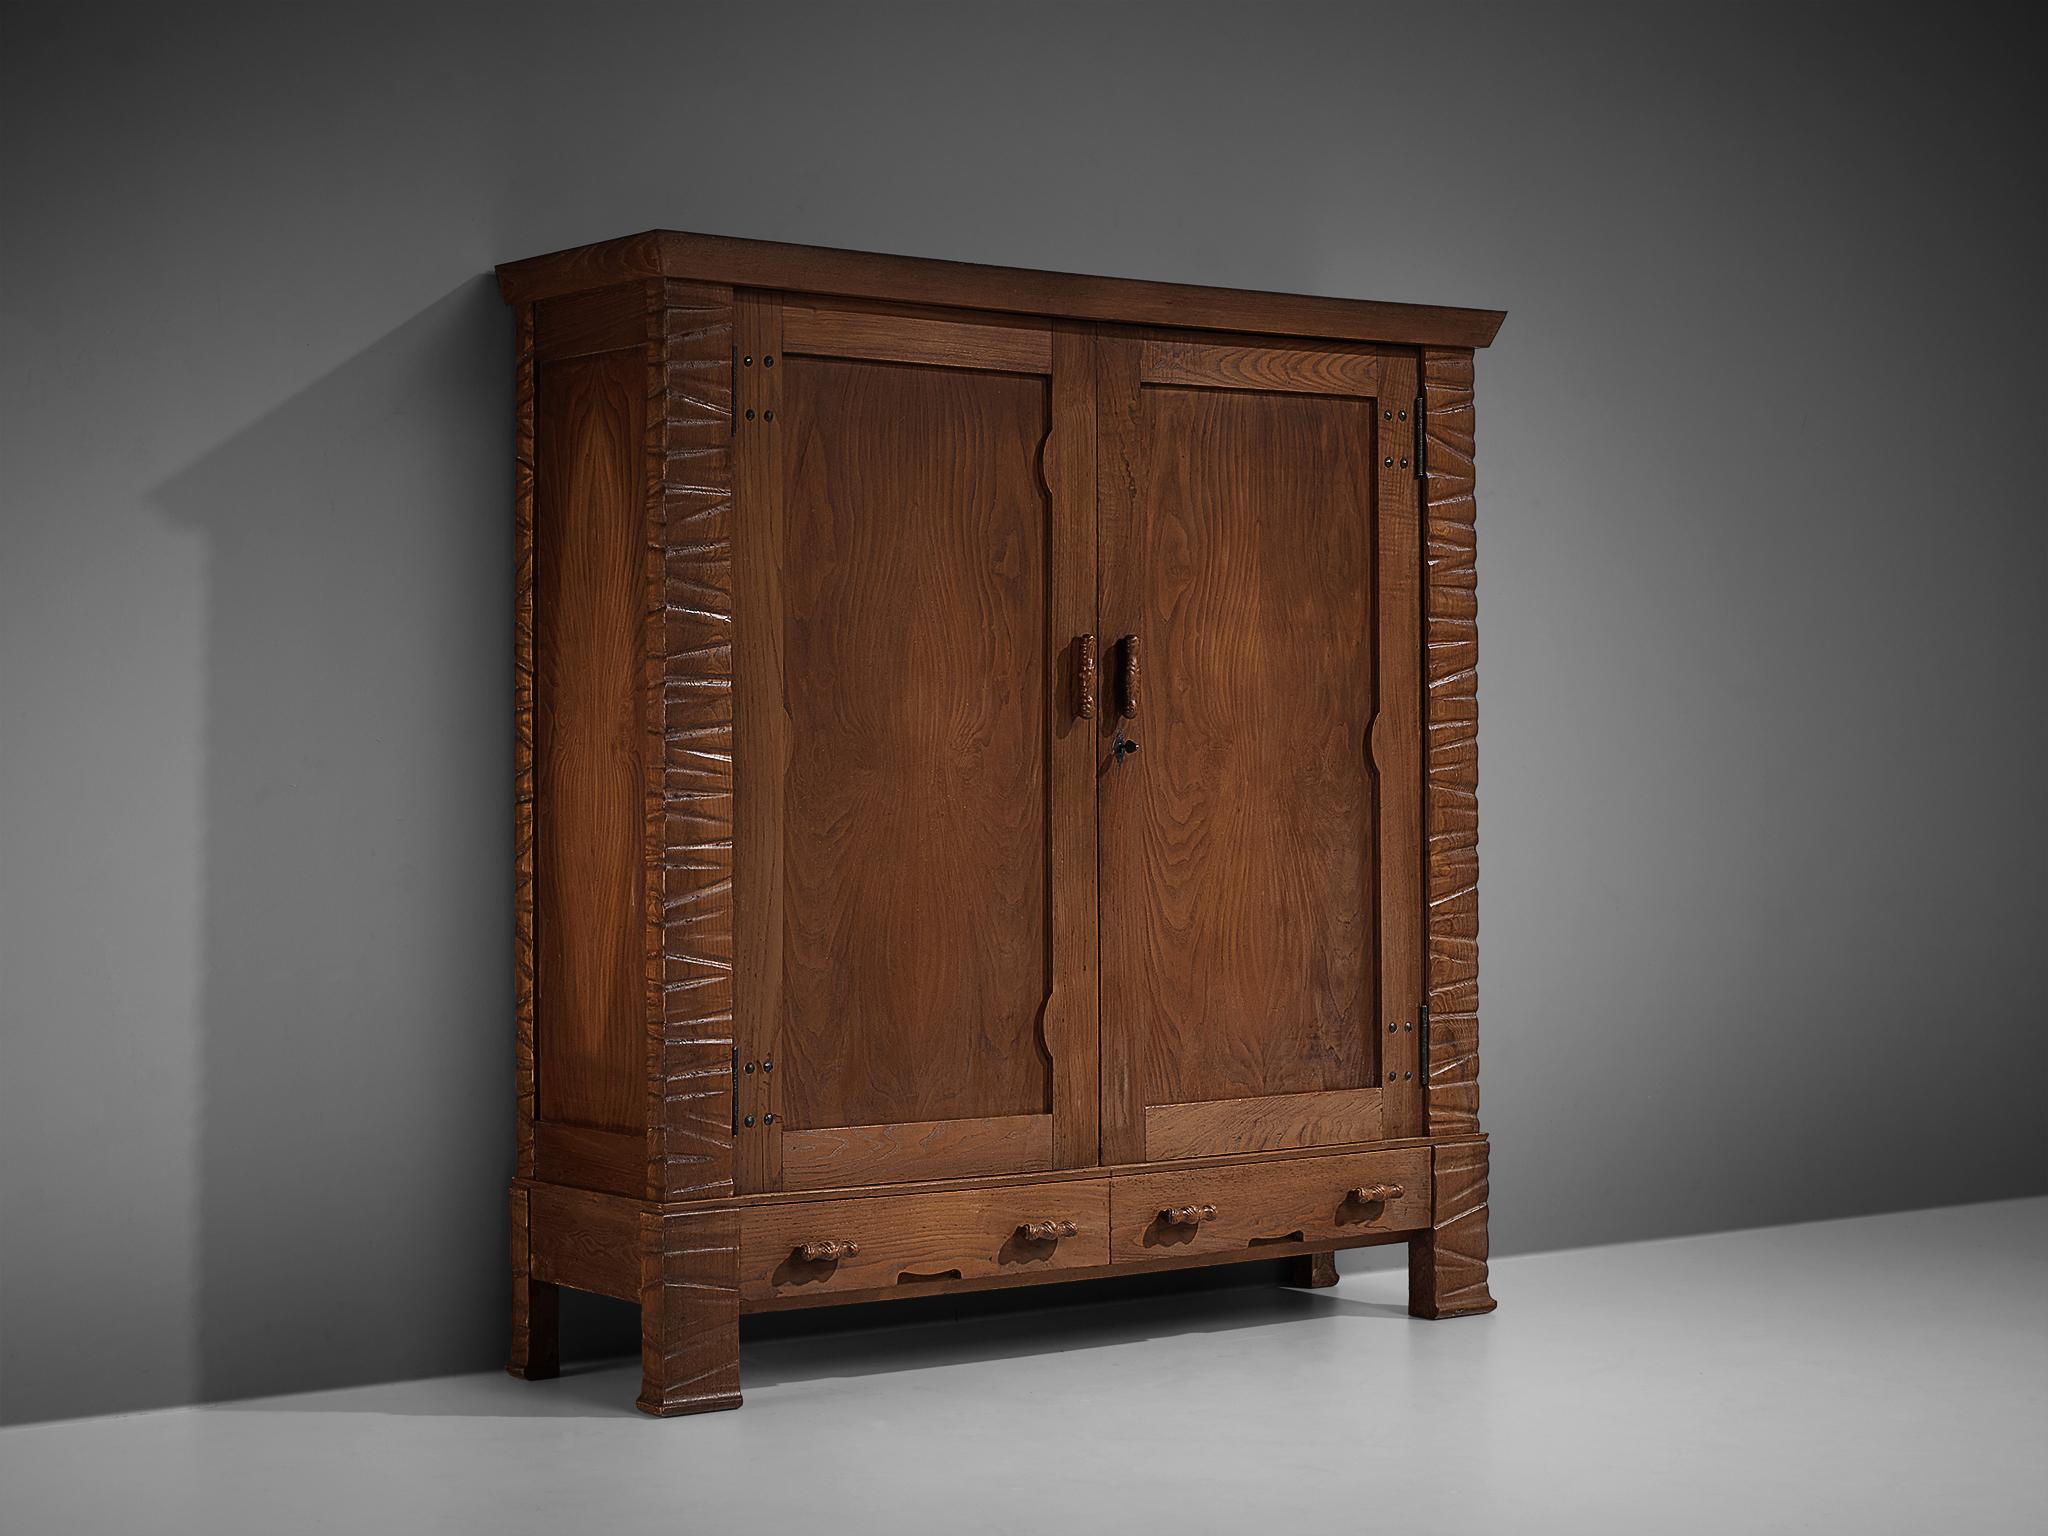 Ernesto Valabrega, wardrobe, oak, glass, Italy, ca. 1935

This large wardrobe shows the characteristics of Ernesto Valabrega's designs. The dynamic engraved corners in combination with long, rounded handles. With drawers at the bottom and two doors